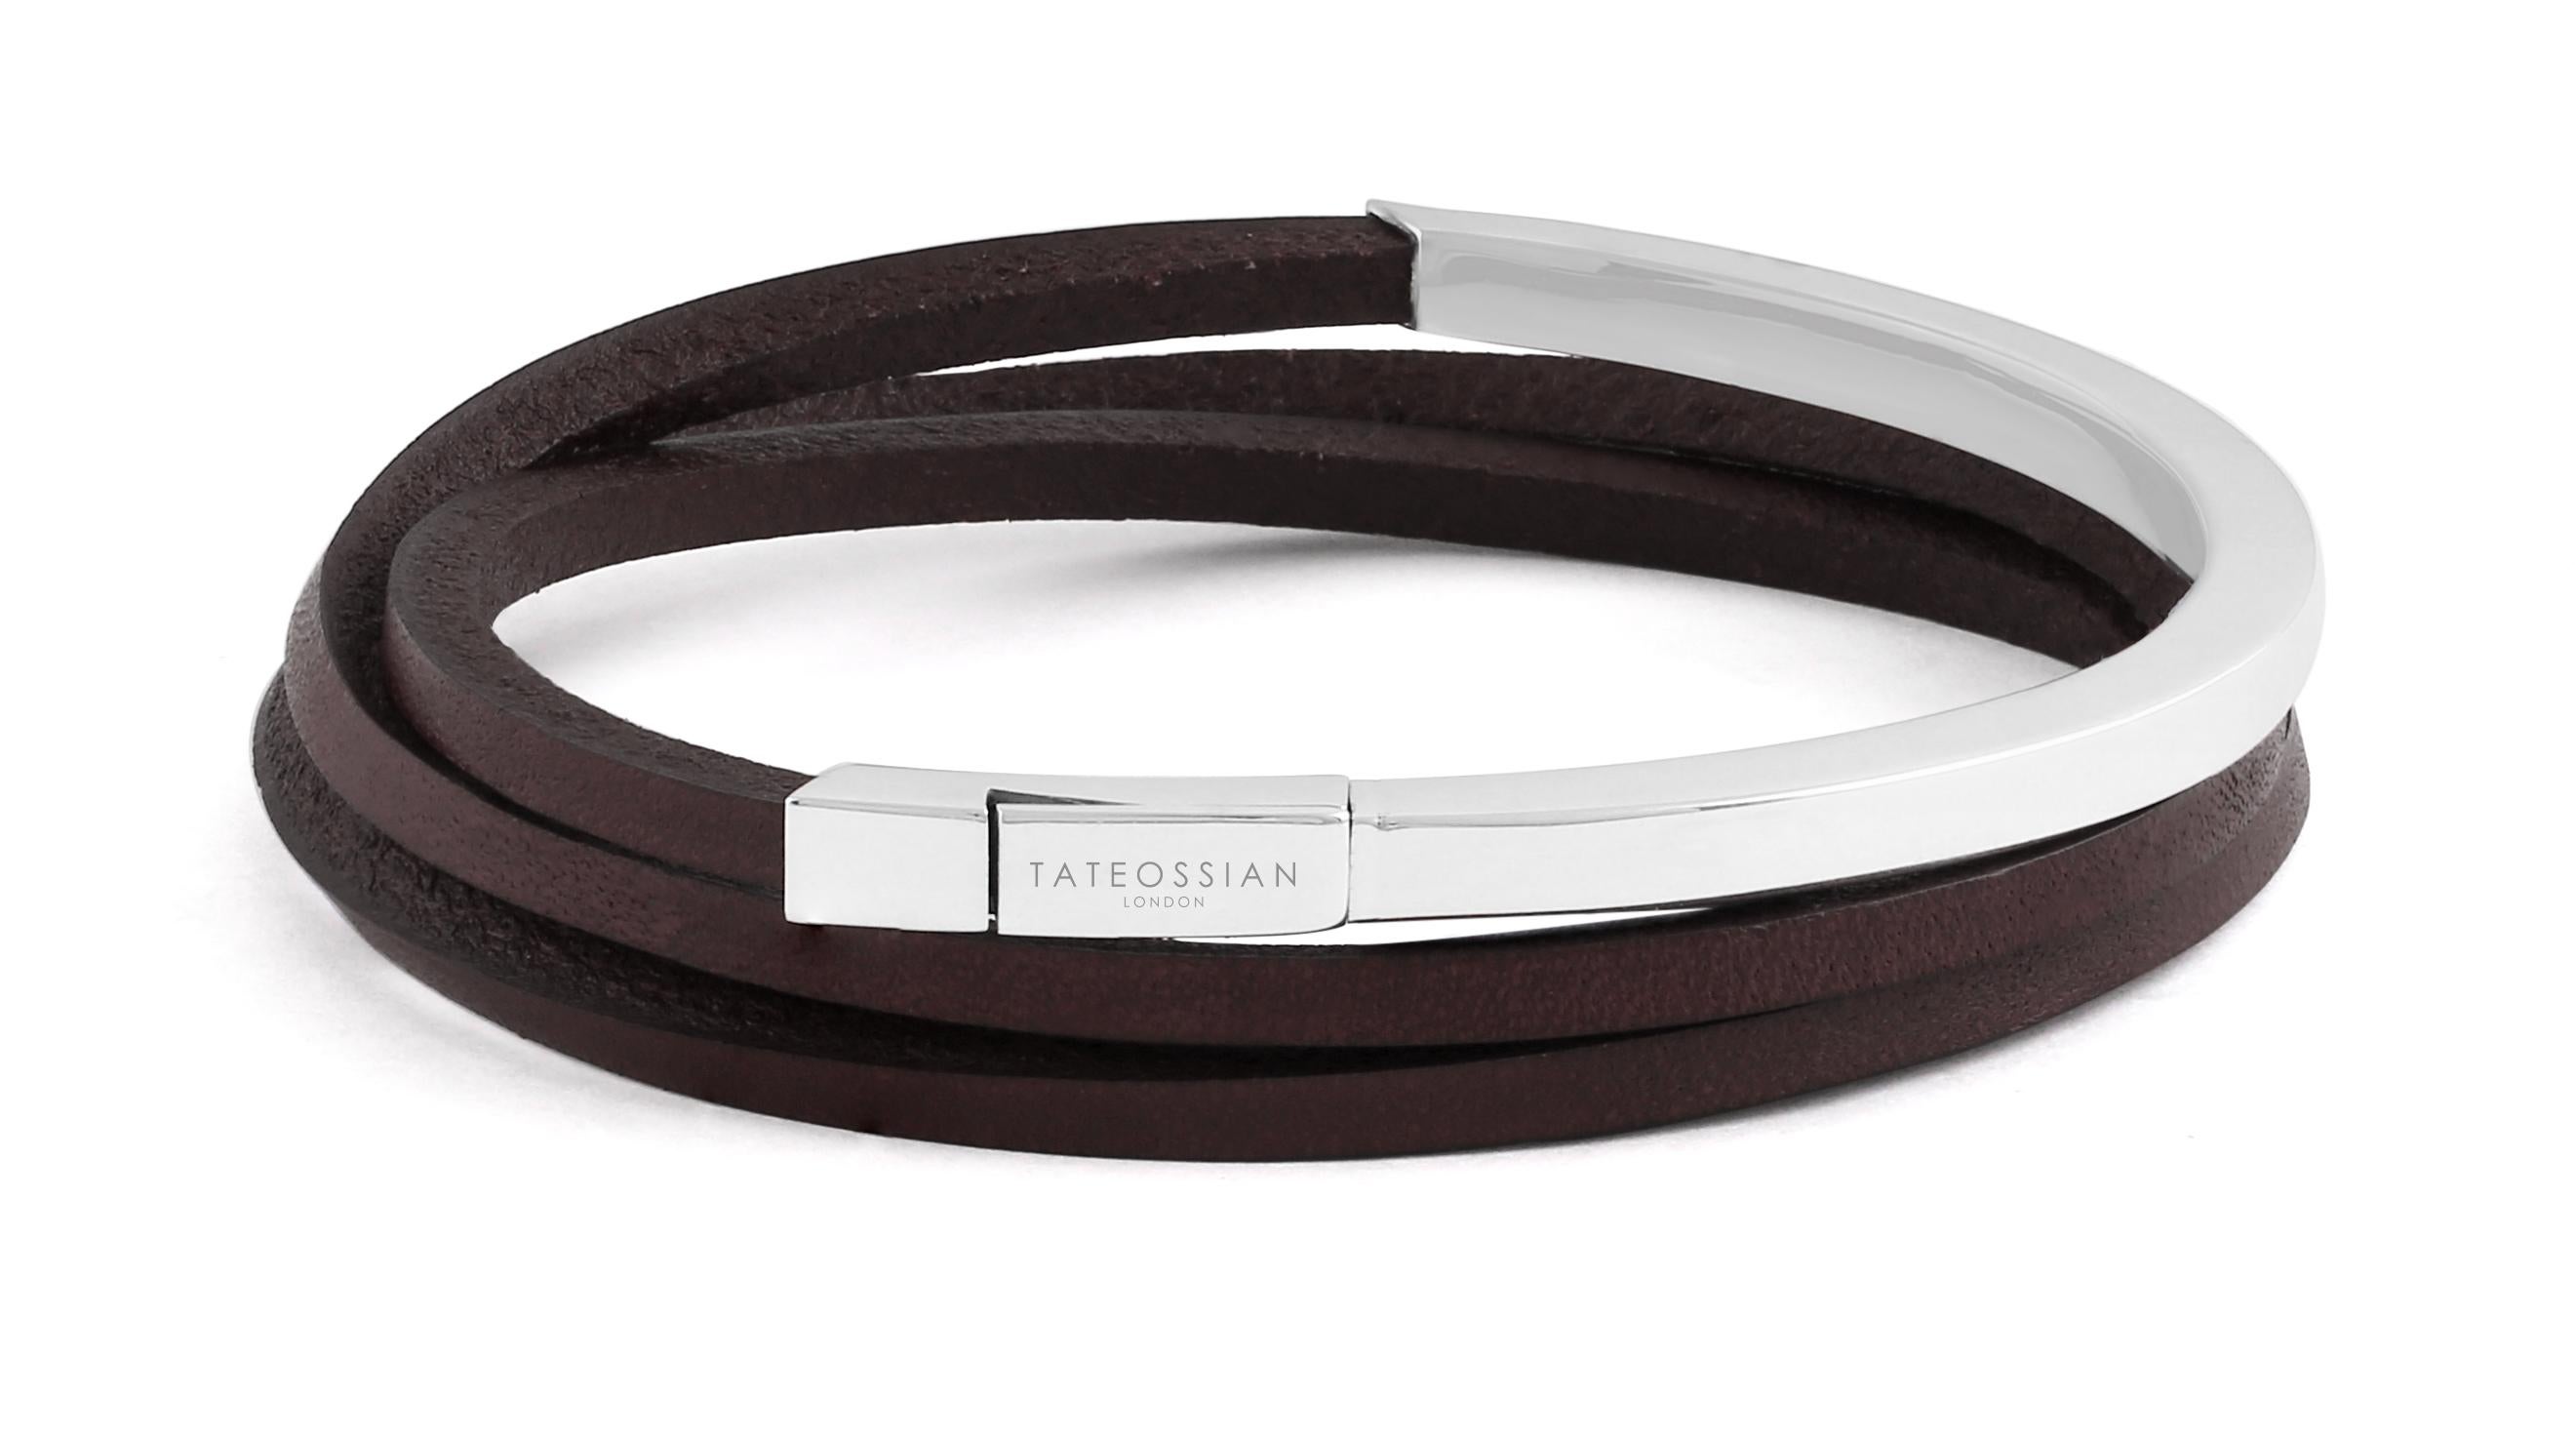 A super sleek, modern bracelet, comprising of a half bangle component, finished with a triple wrap of Italian fetucinne leather. This easy to wear bracelet can be worn either as a statement bracelet, or stacked with beads to give a textured bracelet